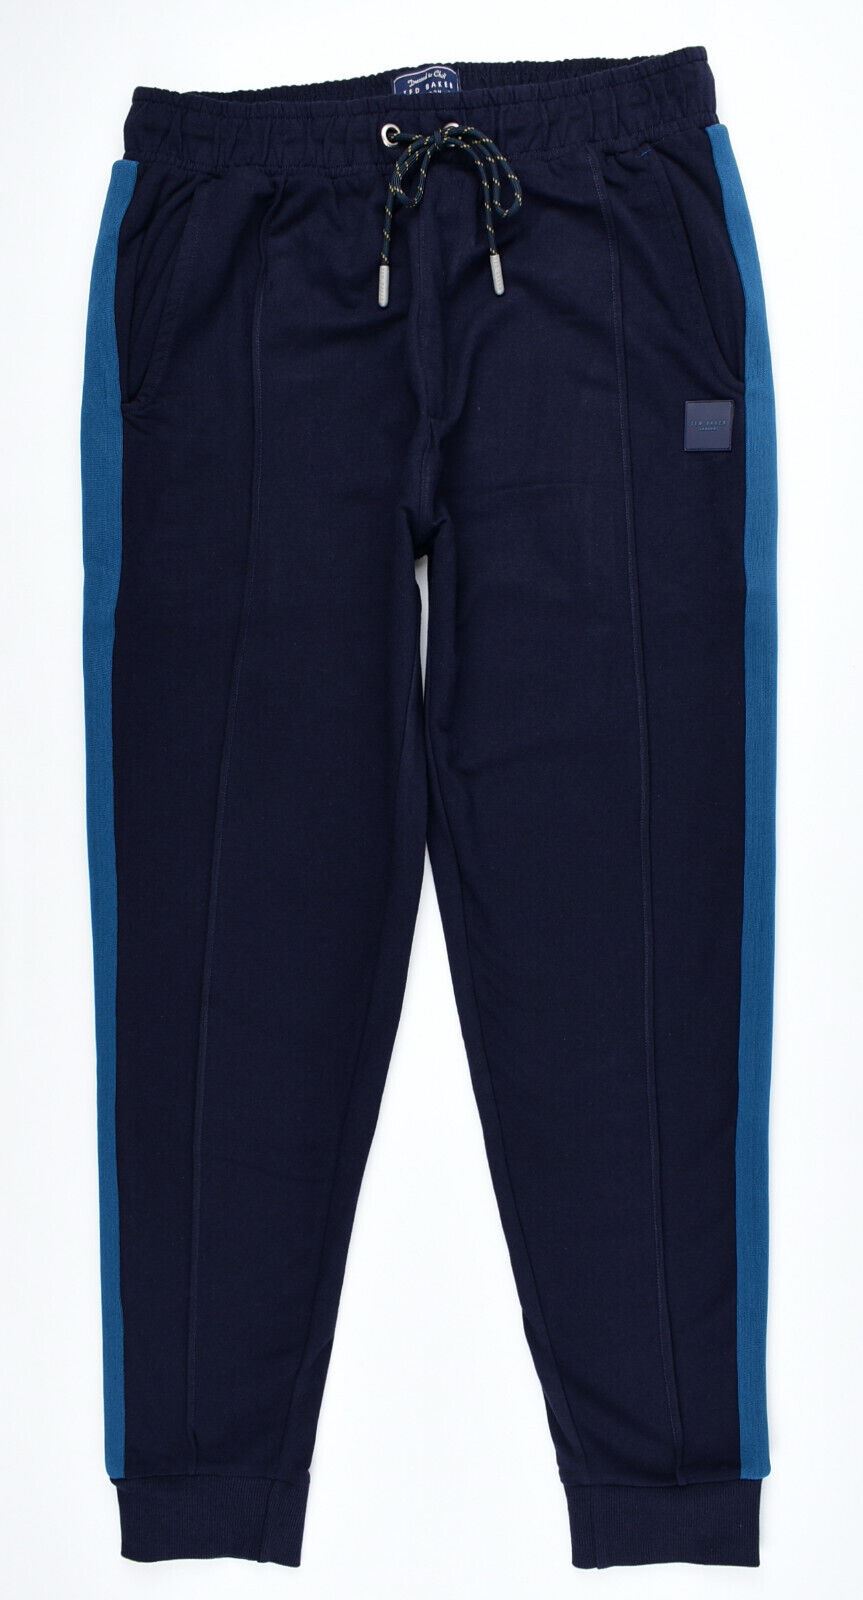 TED BAKER Men's French Terry Joggers, Lounging Pants, Navy Blue, Ted size 5 /XL